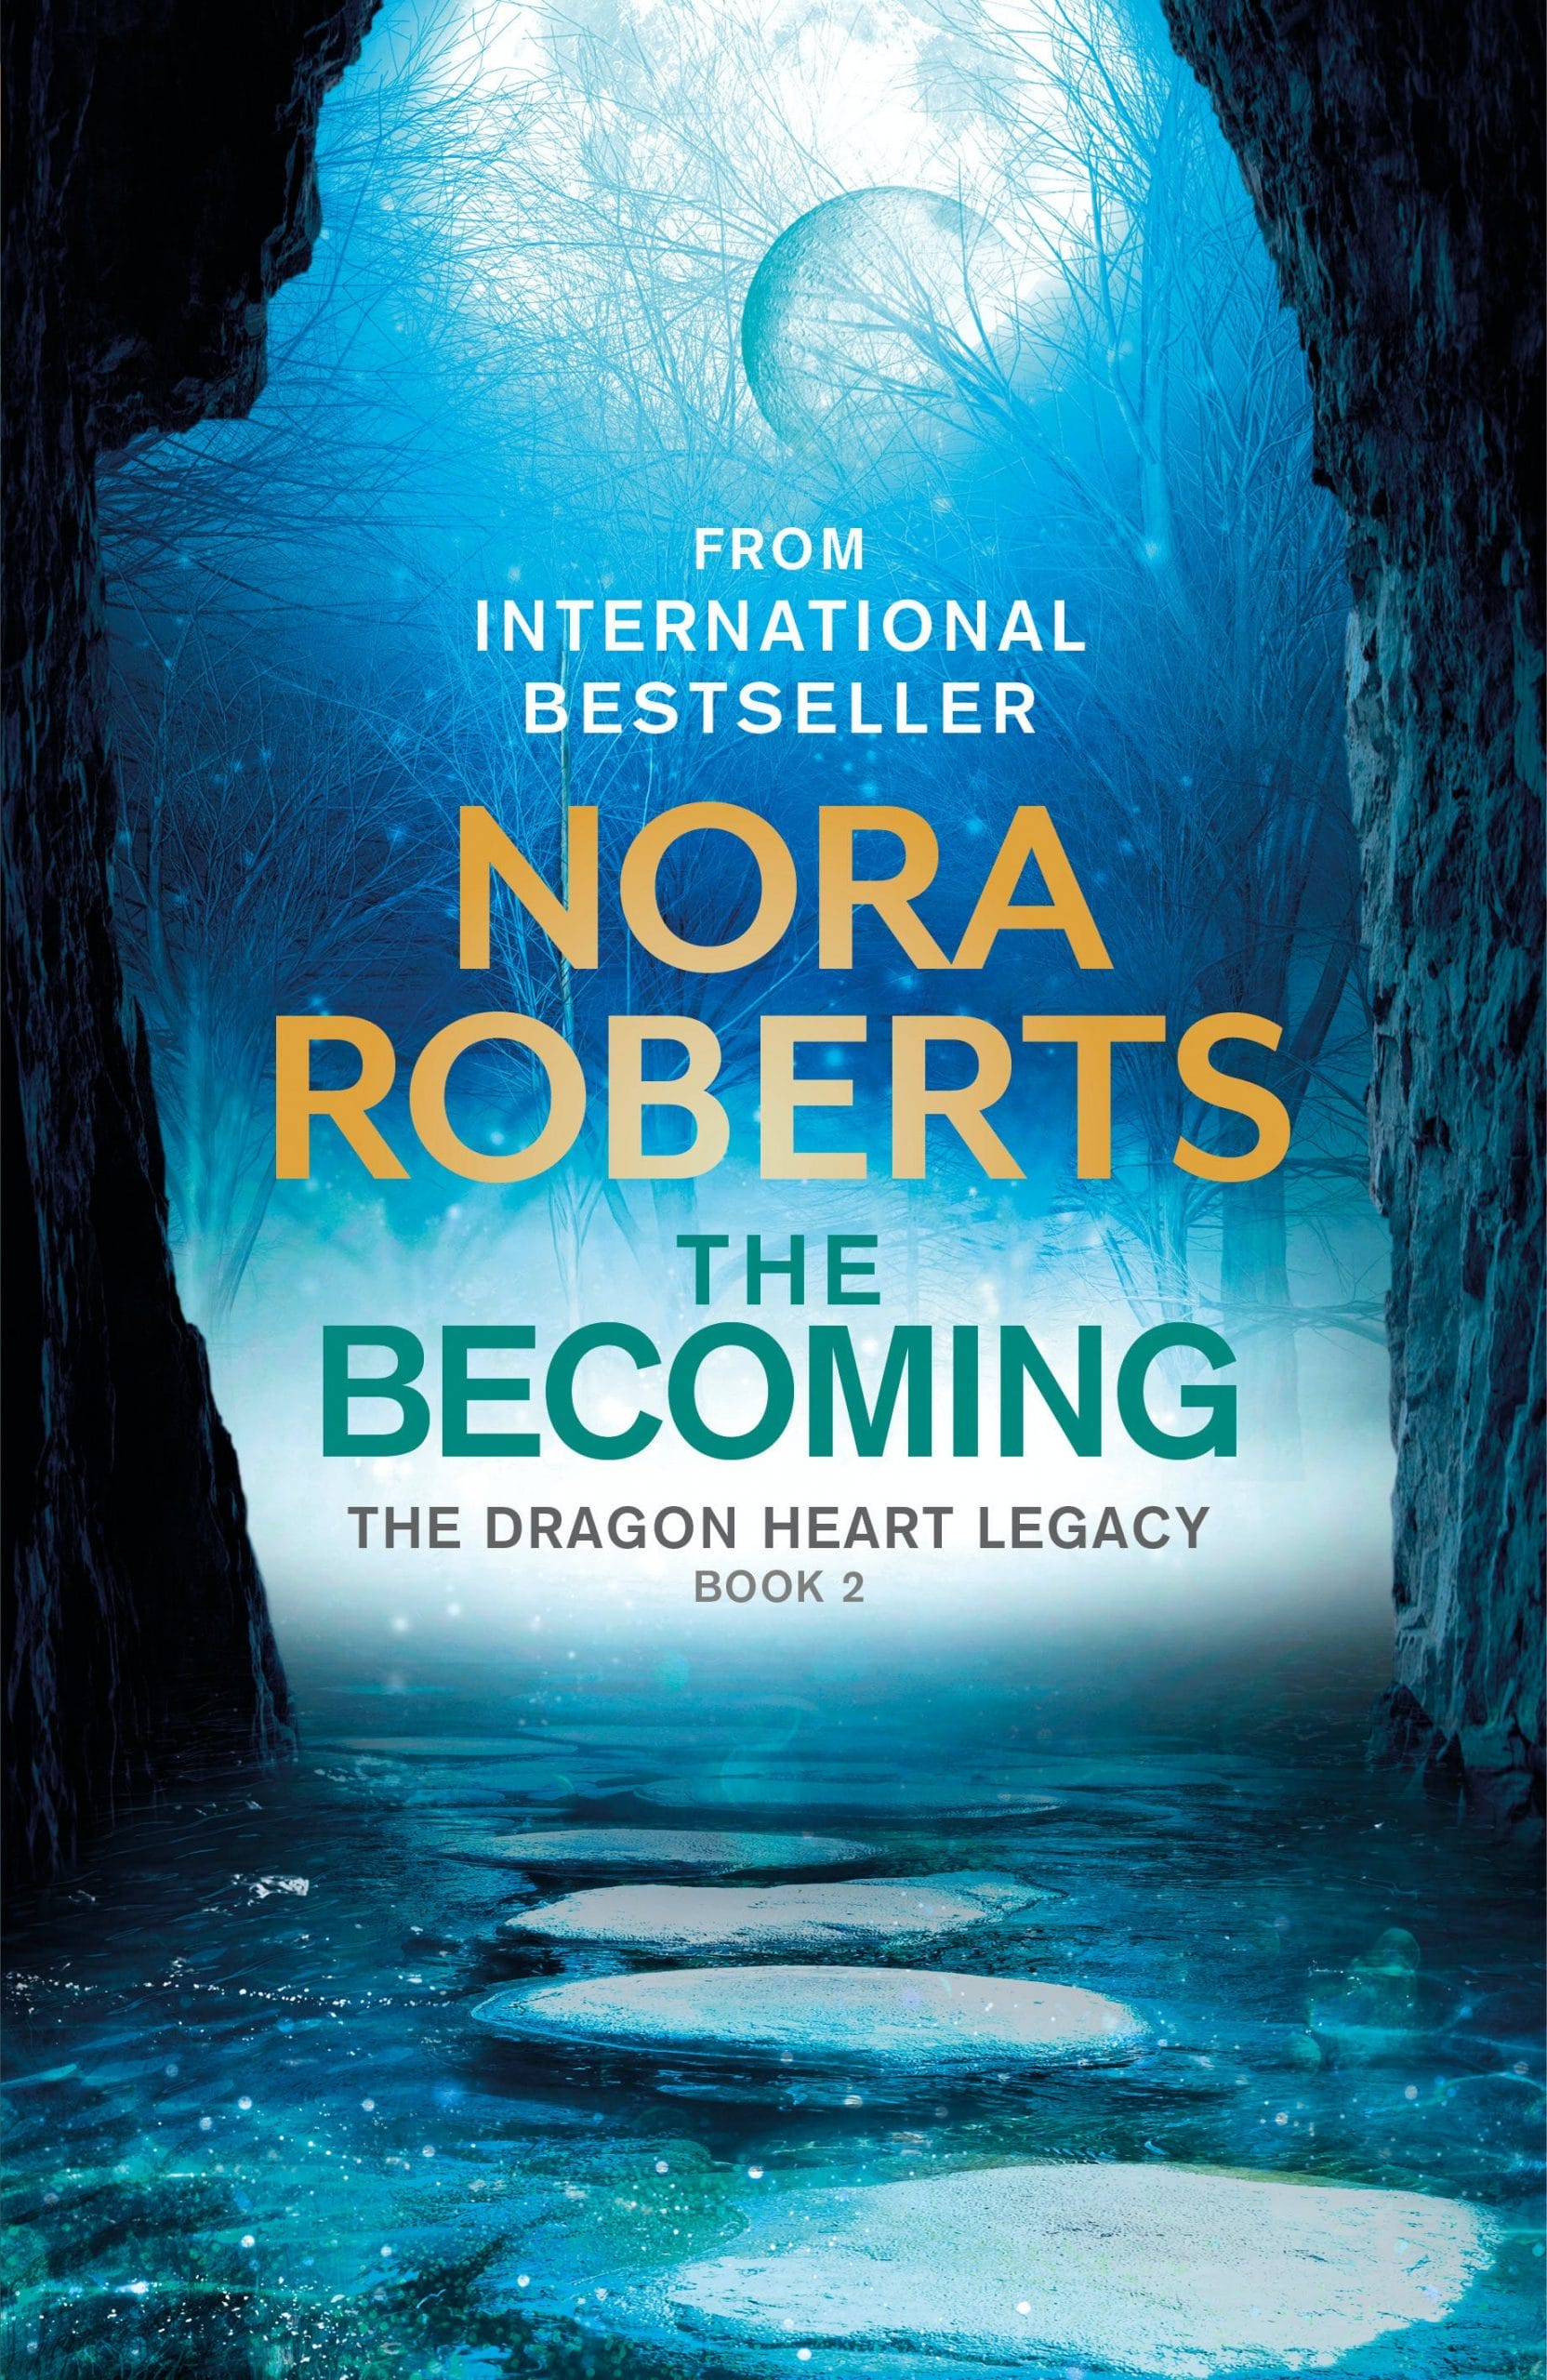 nora roberts book the search